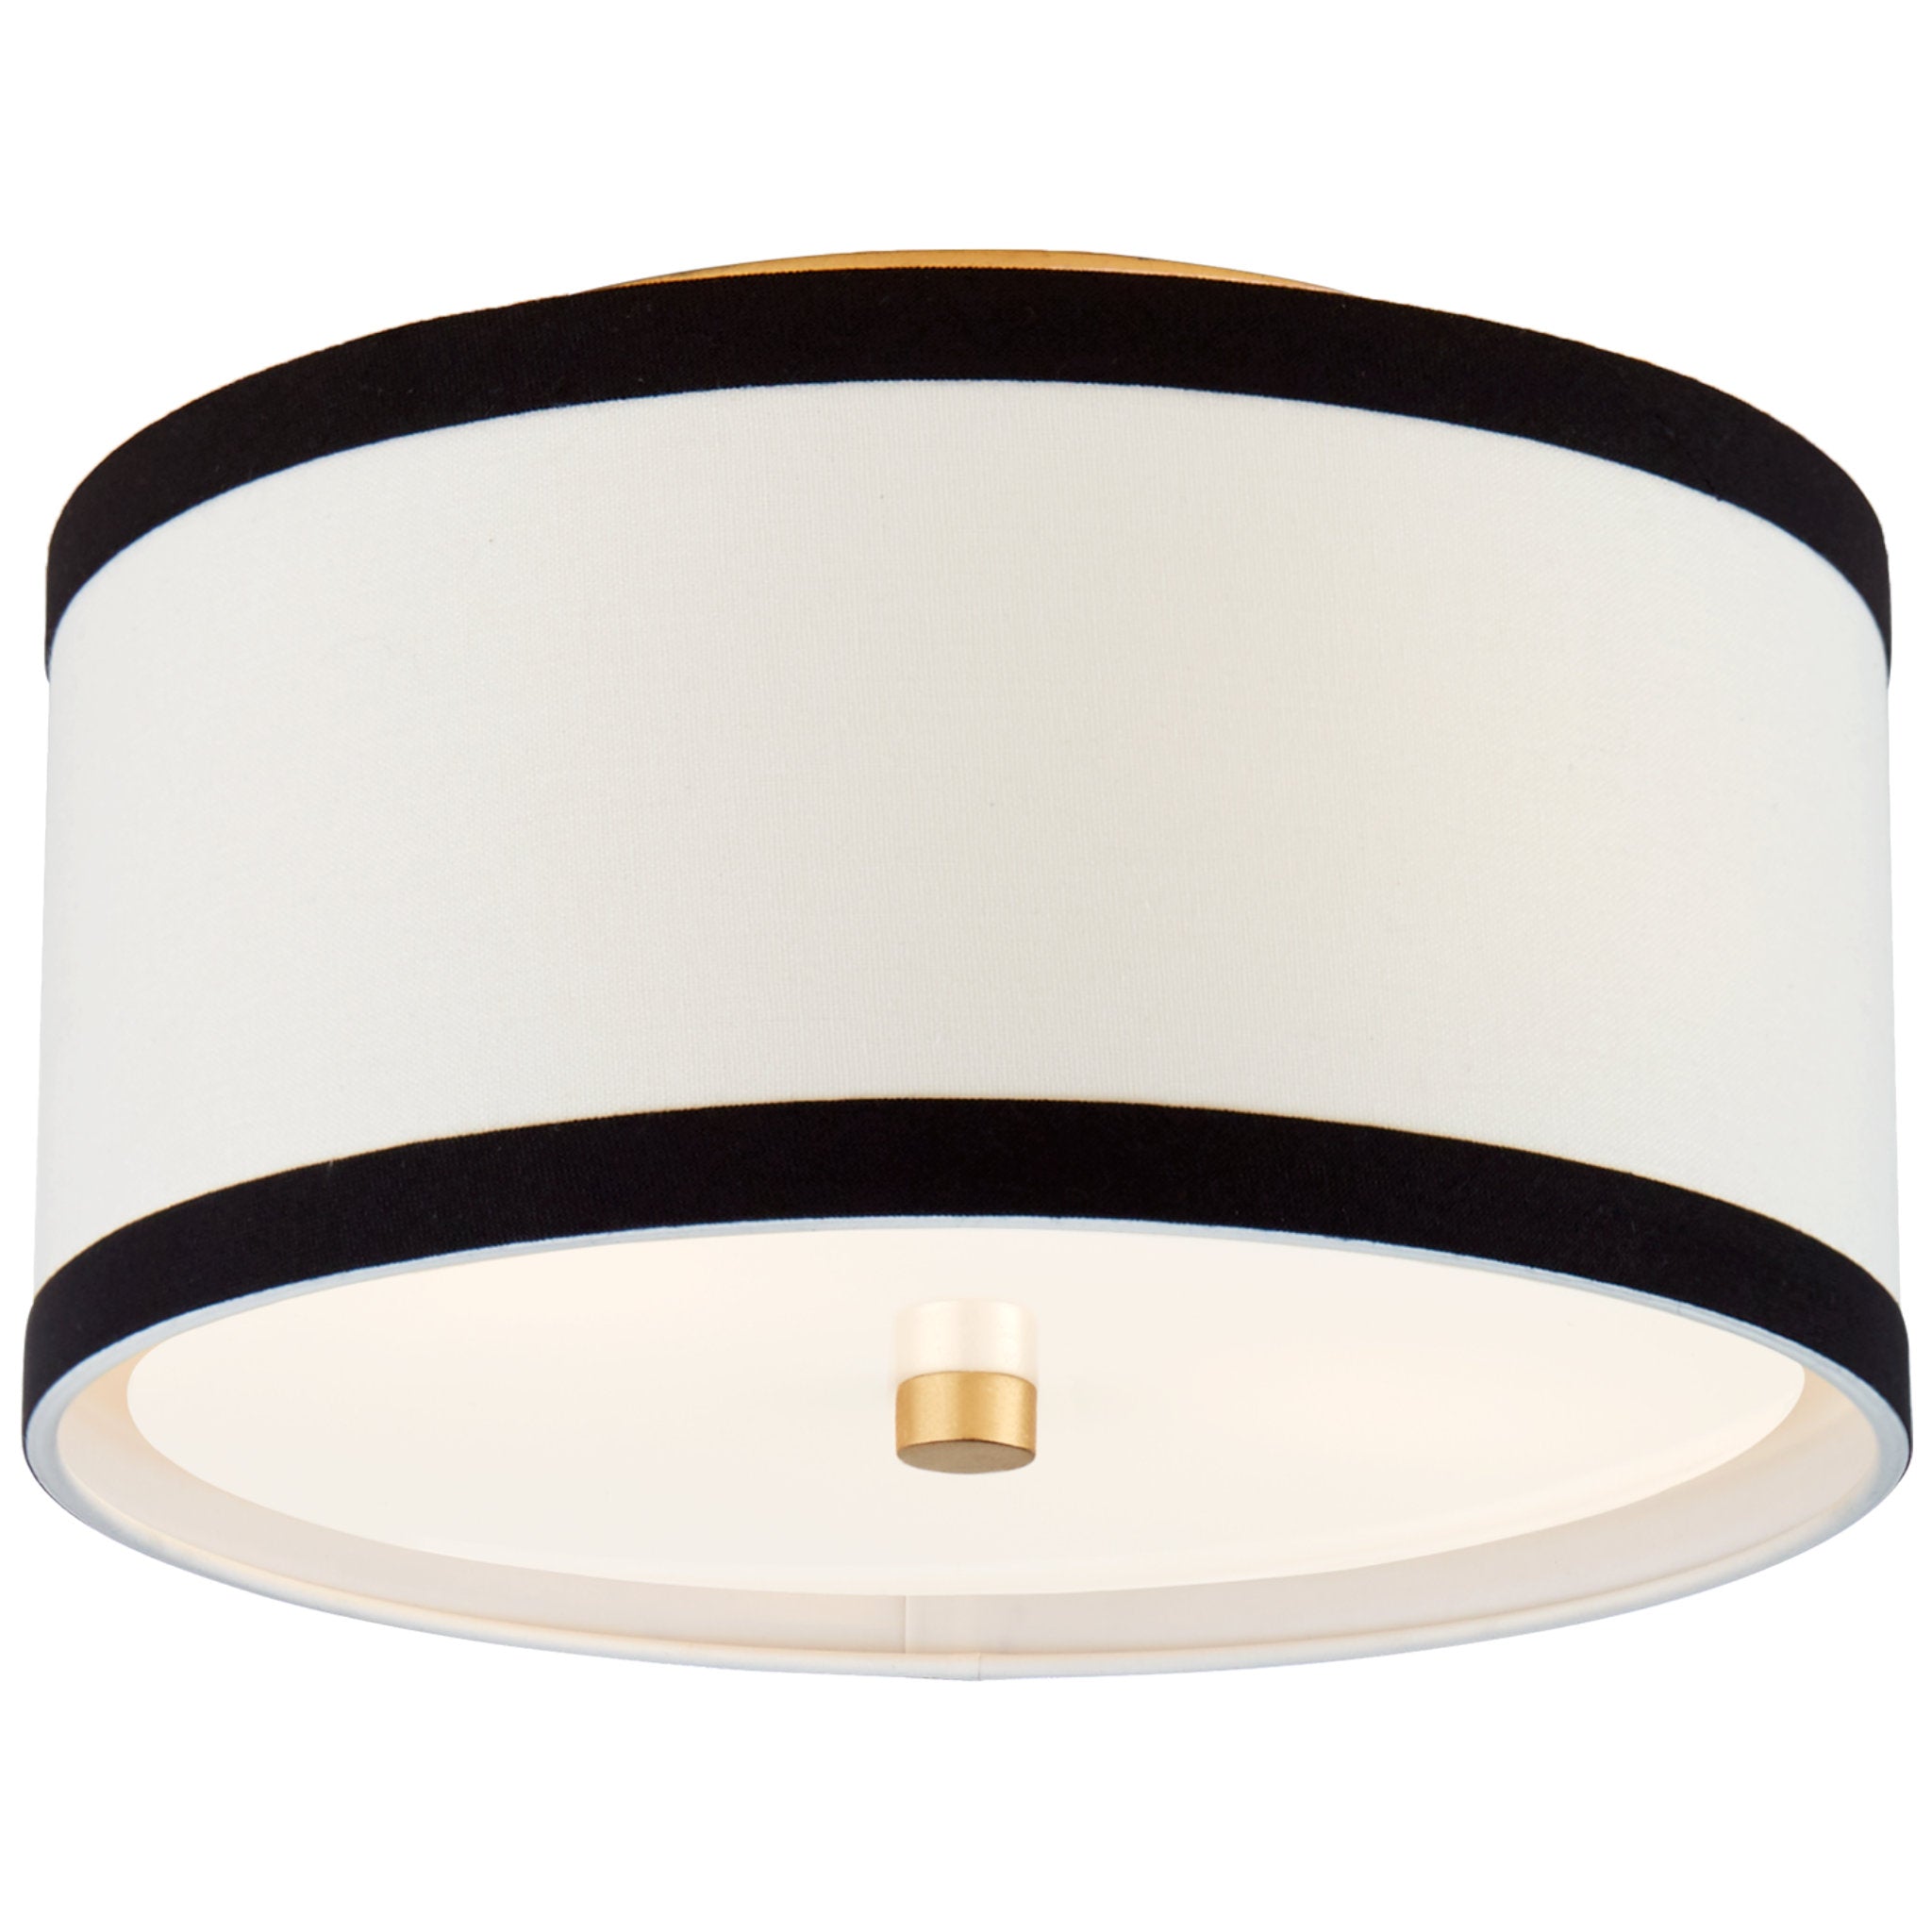 kate spade new york Walker Small Flush Mount in Gild with Cream Linen with Black Linen Trim